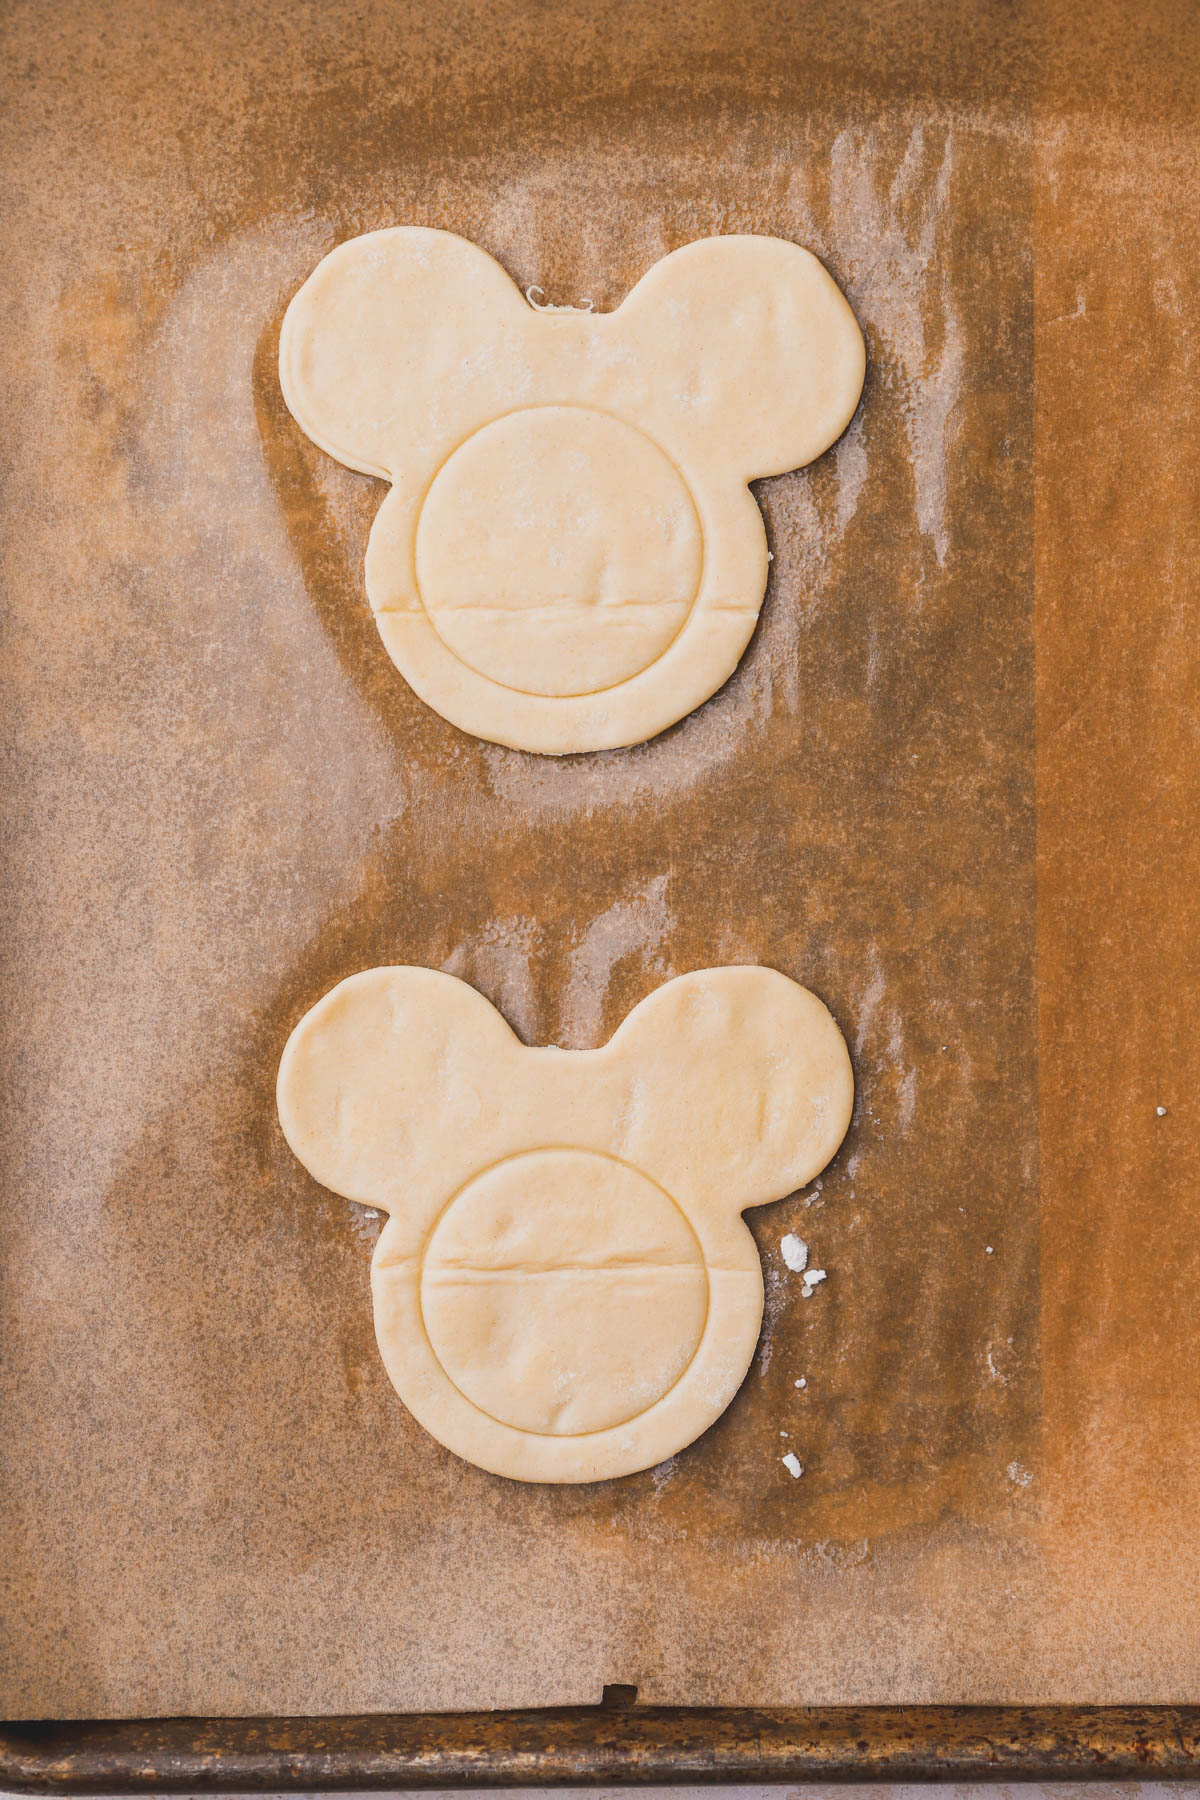 Mickey shaped puff pastry 